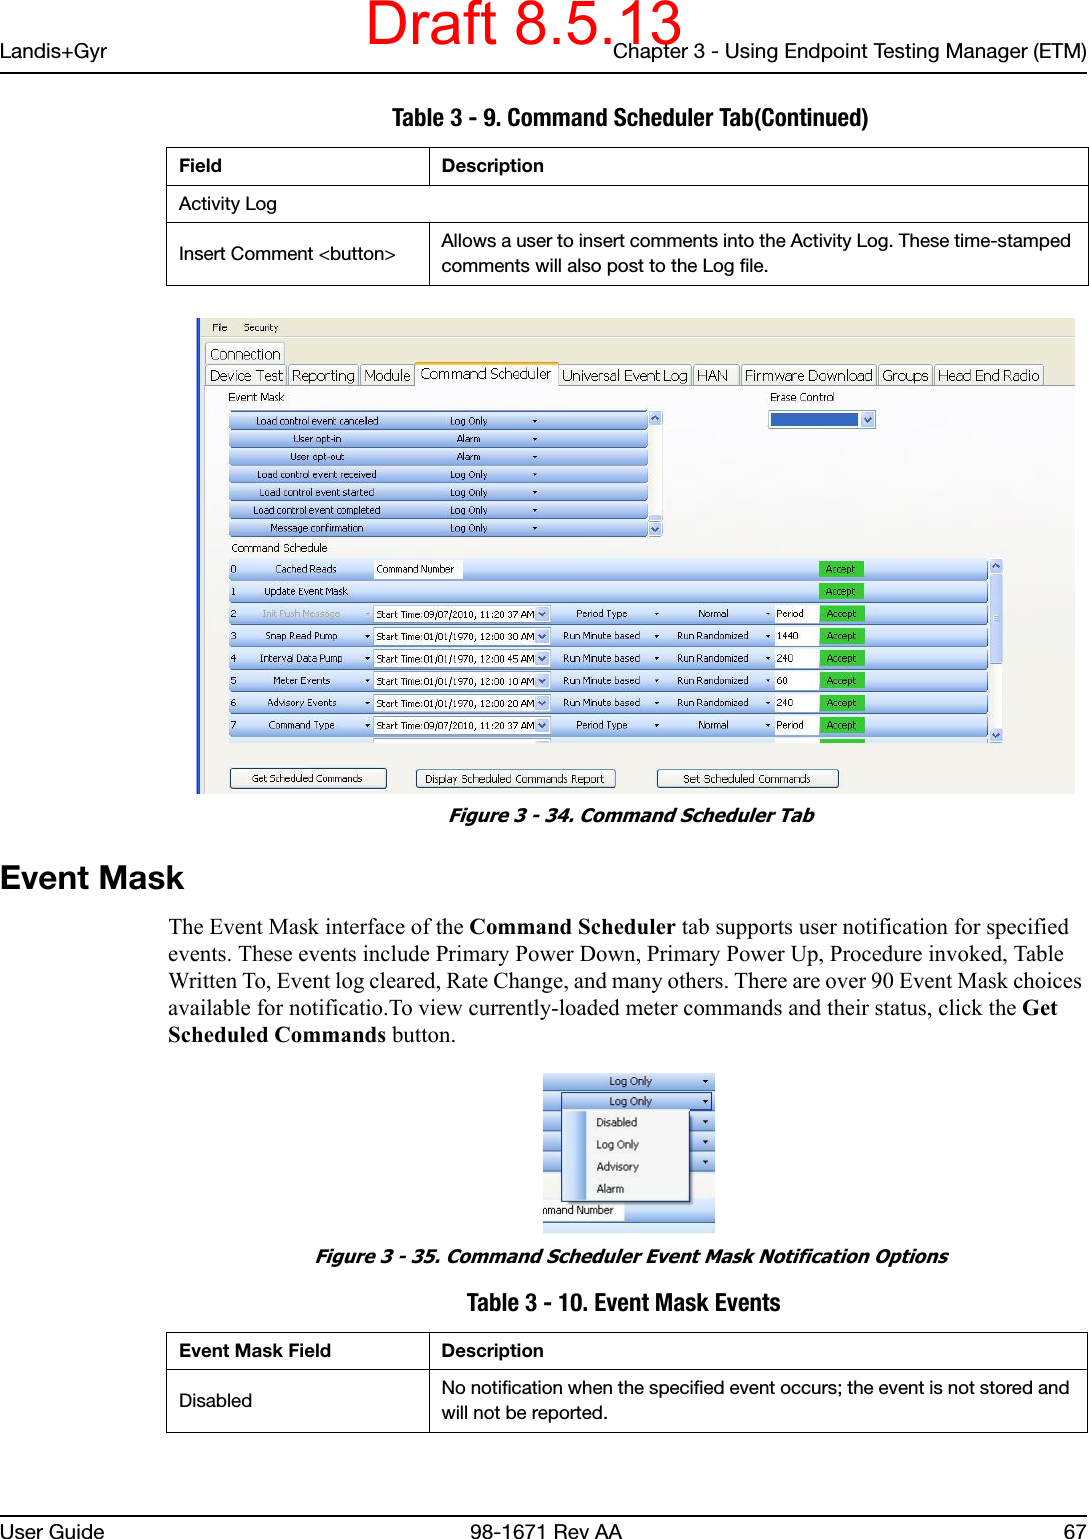 Landis+Gyr Chapter 3 - Using Endpoint Testing Manager (ETM)User Guide  98-1671 Rev AA 67 Figure 3 - 34. Command Scheduler TabEvent MaskThe Event Mask interface of the Command Scheduler tab supports user notification for specified events. These events include Primary Power Down, Primary Power Up, Procedure invoked, Table Written To, Event log cleared, Rate Change, and many others. There are over 90 Event Mask choices available for notificatio.To view currently-loaded meter commands and their status, click the Get Scheduled Commands button. Figure 3 - 35. Command Scheduler Event Mask Notification Options Activity LogInsert Comment &lt;button&gt; Allows a user to insert comments into the Activity Log. These time-stamped comments will also post to the Log file. Table 3 - 9. Command Scheduler Tab(Continued)Field Description Table 3 - 10. Event Mask Events Event Mask Field DescriptionDisabled No notification when the specified event occurs; the event is not stored and will not be reported.Draft 8.5.13